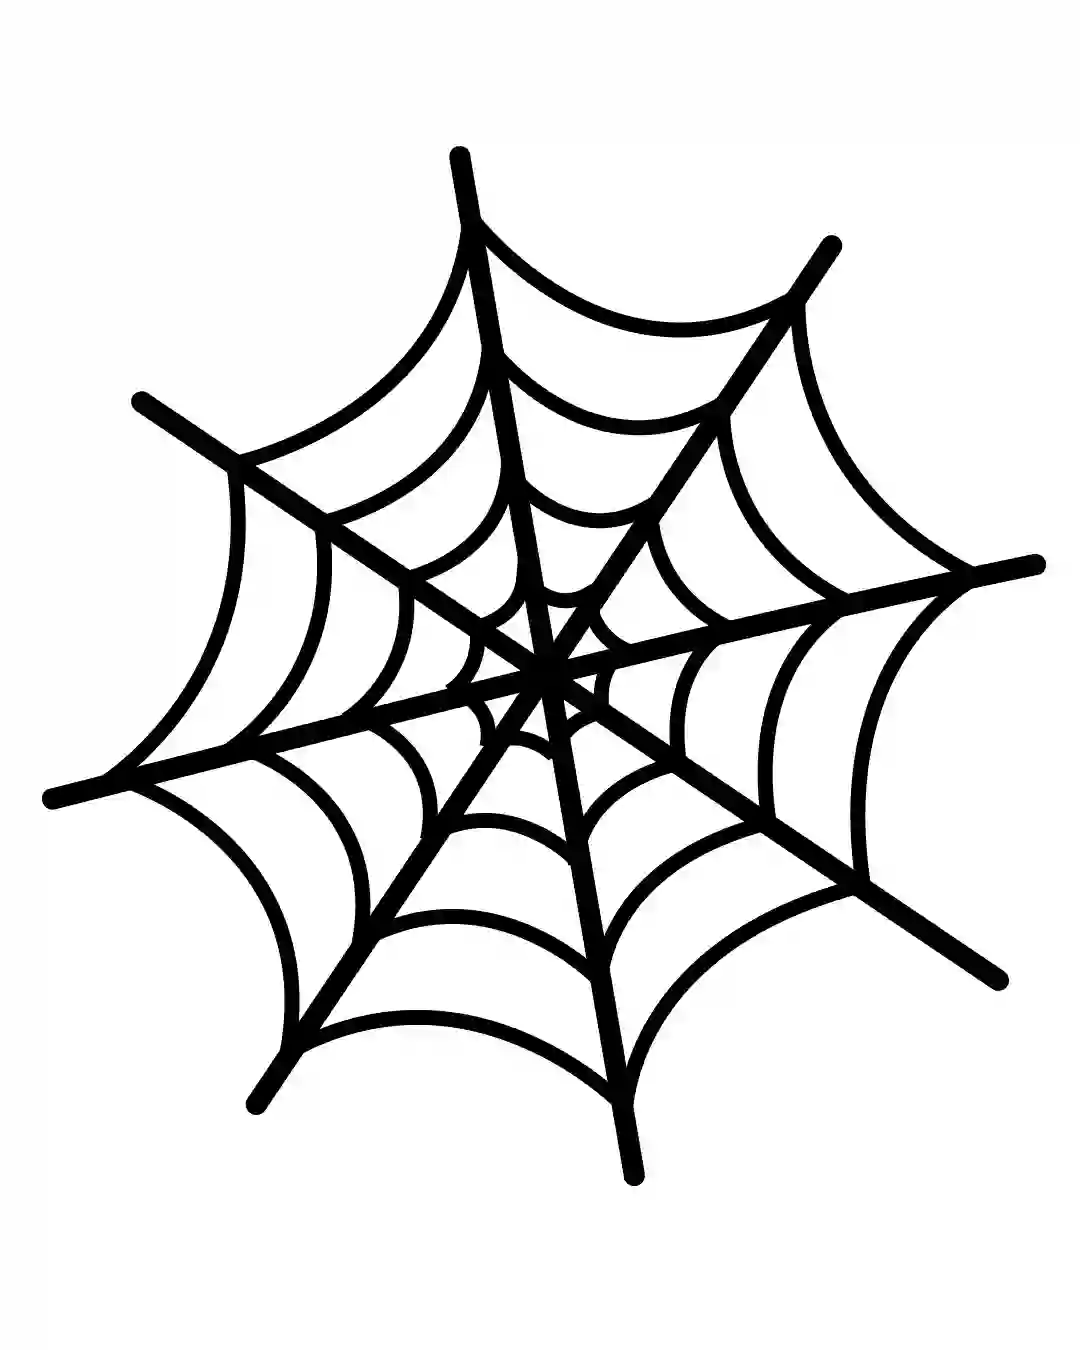 How To Draw Spider Web In Simple And Easy Steps For Beginners